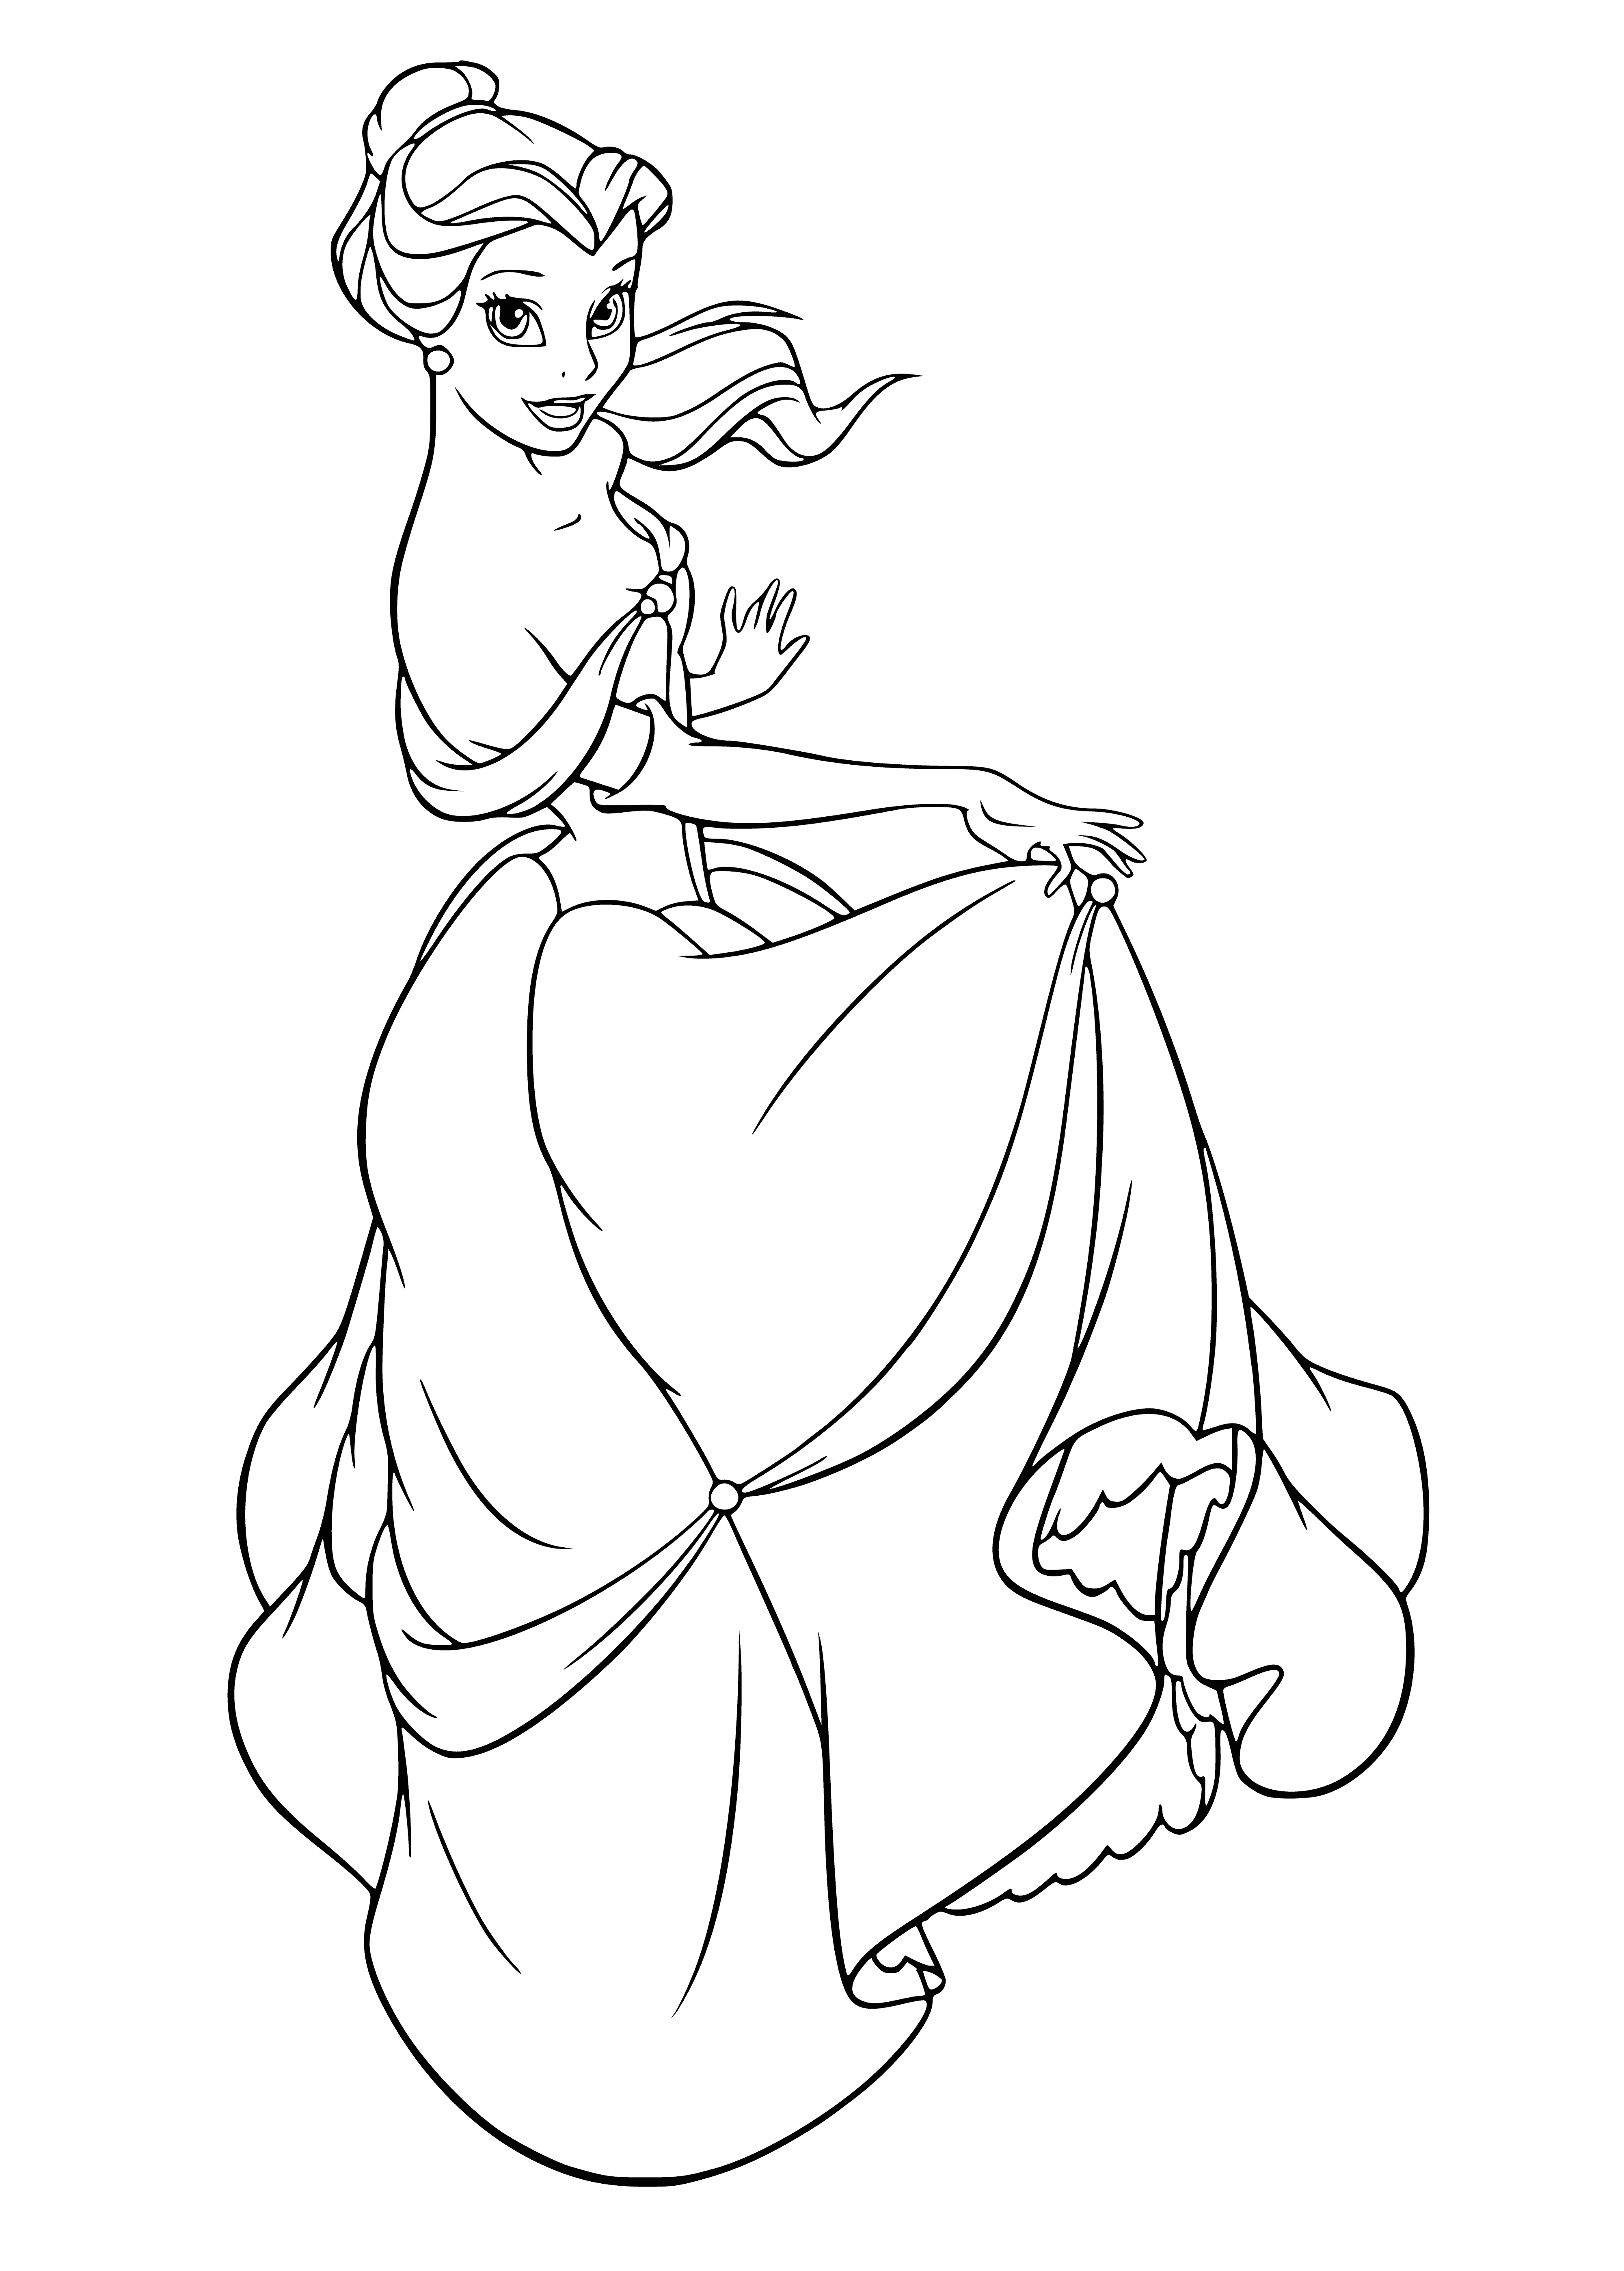 coloring page: Belle and Beast dance in the center of the page, Belle wearing a yellow dress and blue scarf, and Beast in a red cape with rose in hand.